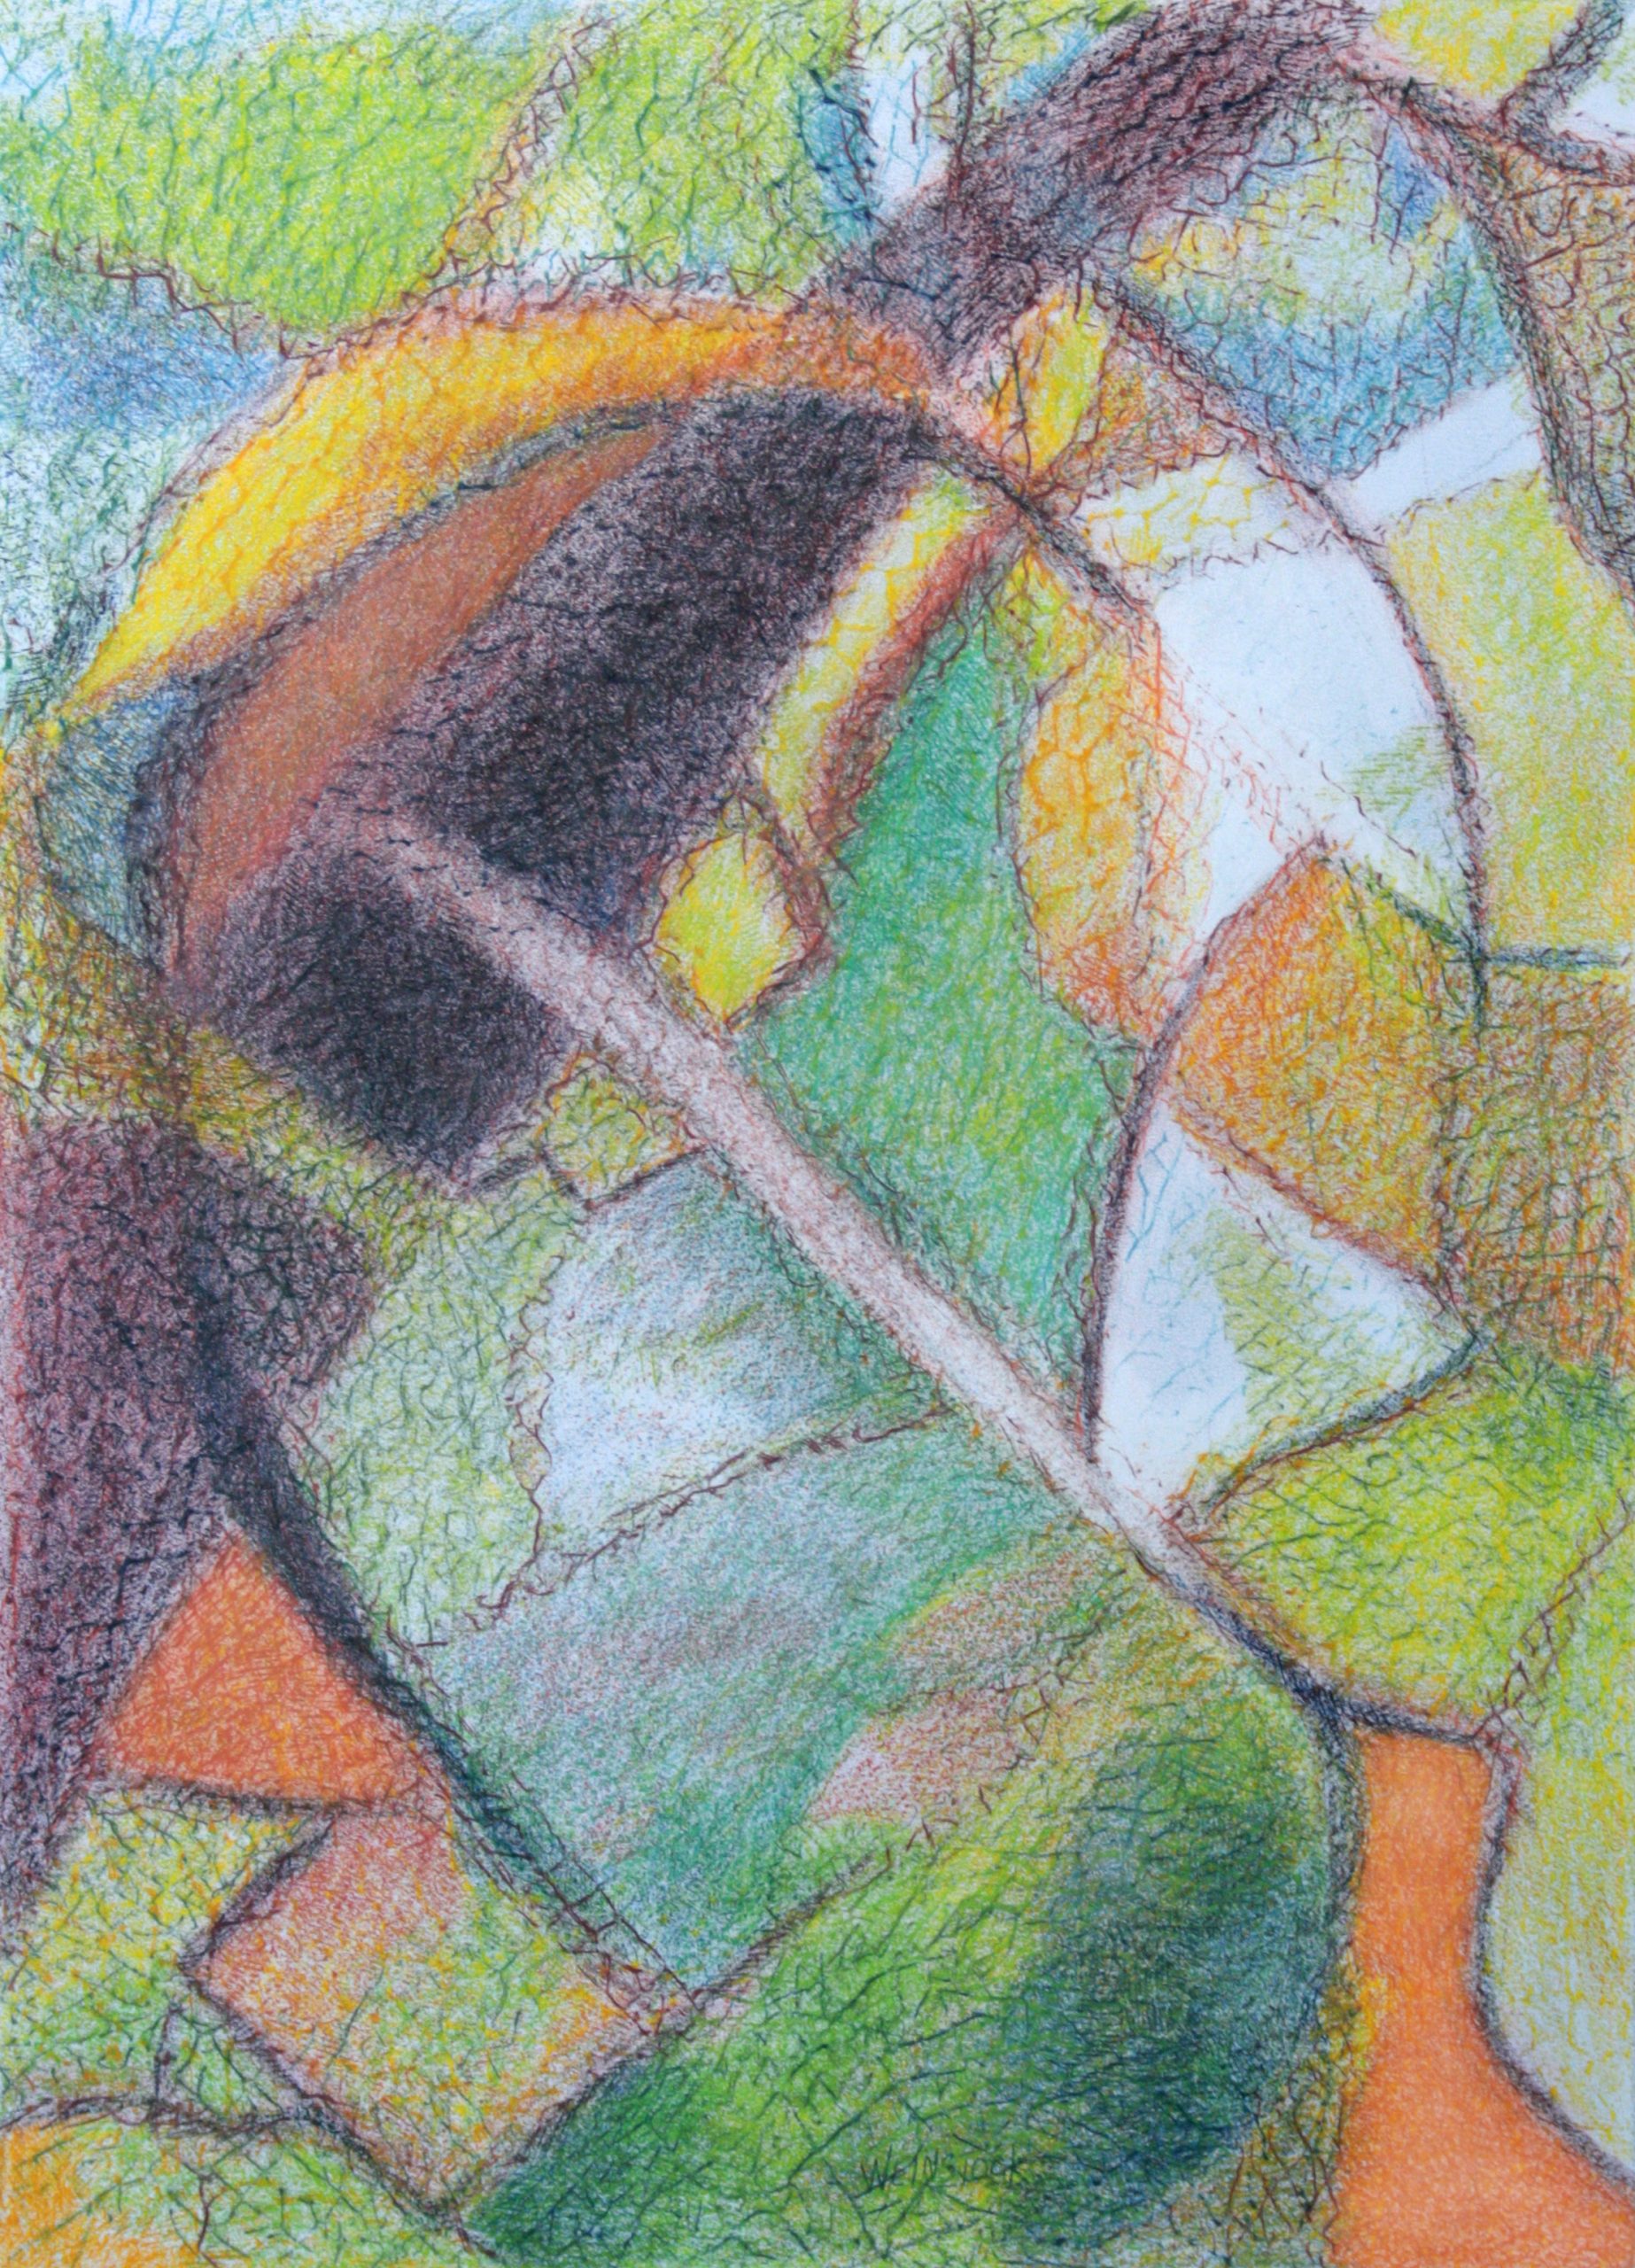 Arlene Weinstock On The Verge of A Breakthrough 24” x 17” Colored pencil, $500